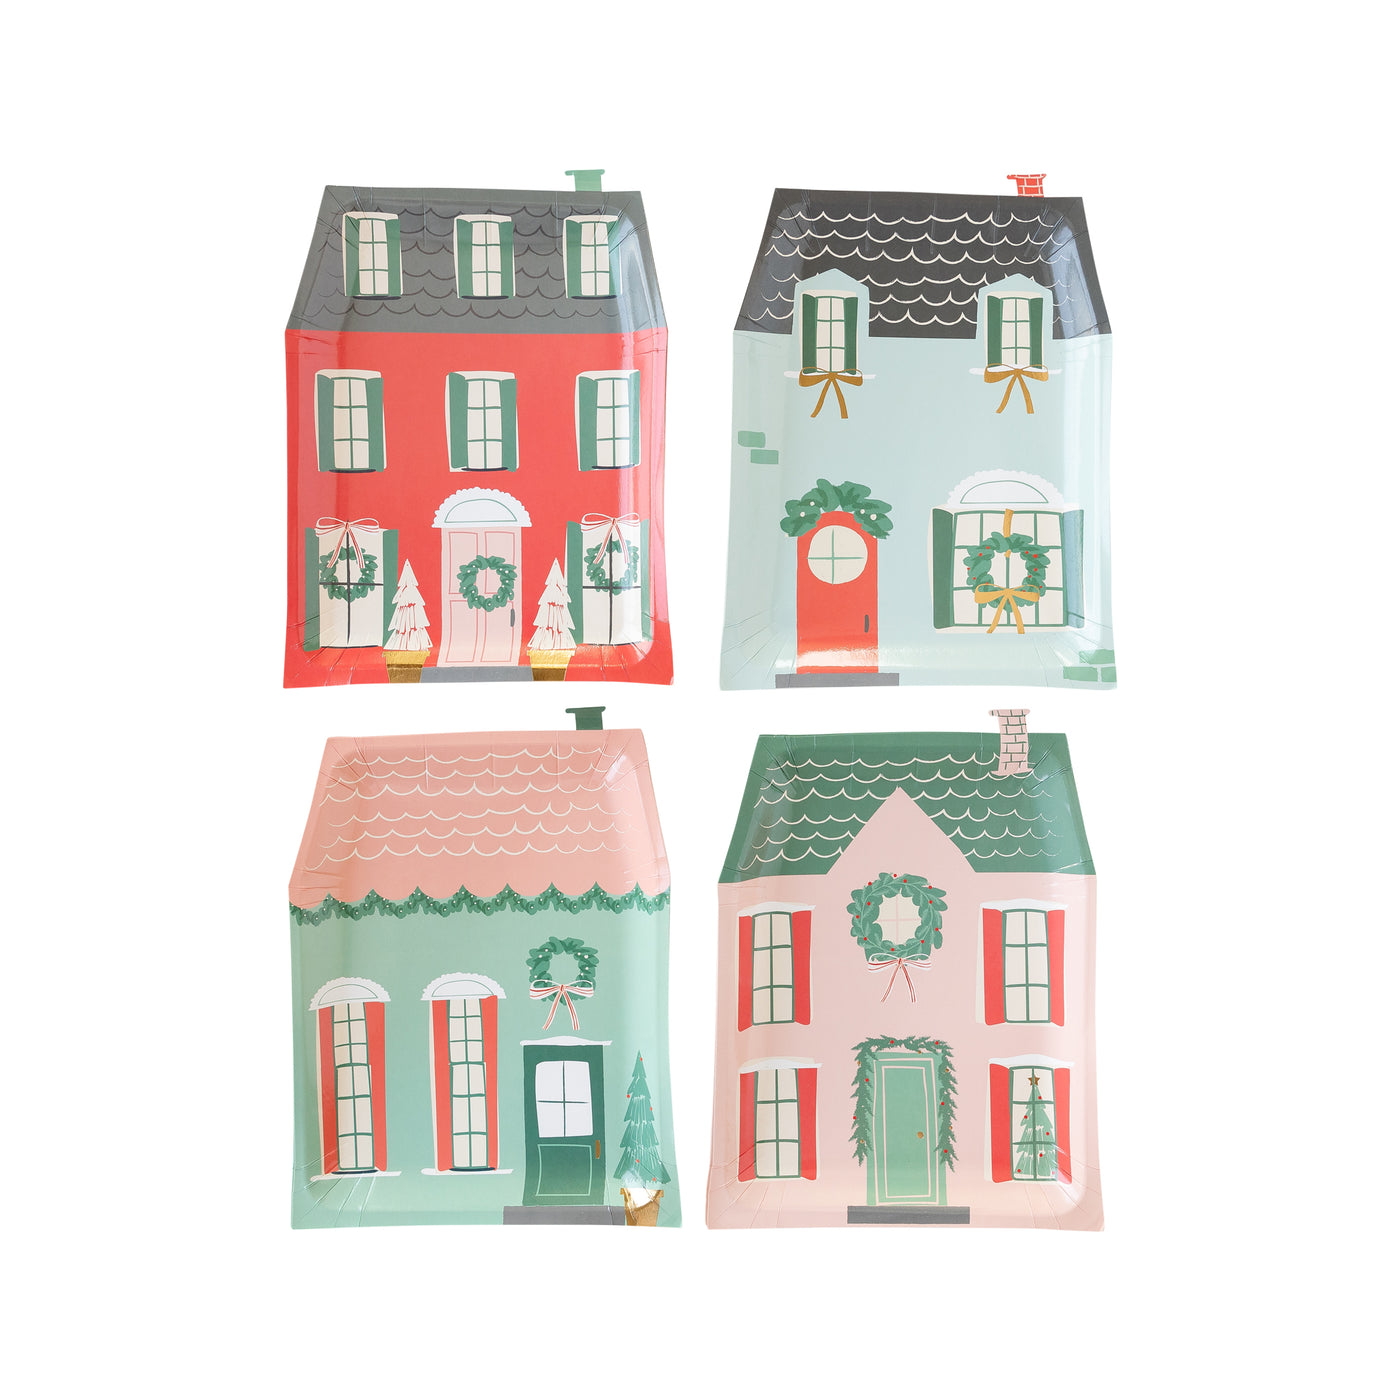 PRESALE SHIPPING MID OCTOBER - VIL940 - Village Christmas House Shaped Plate